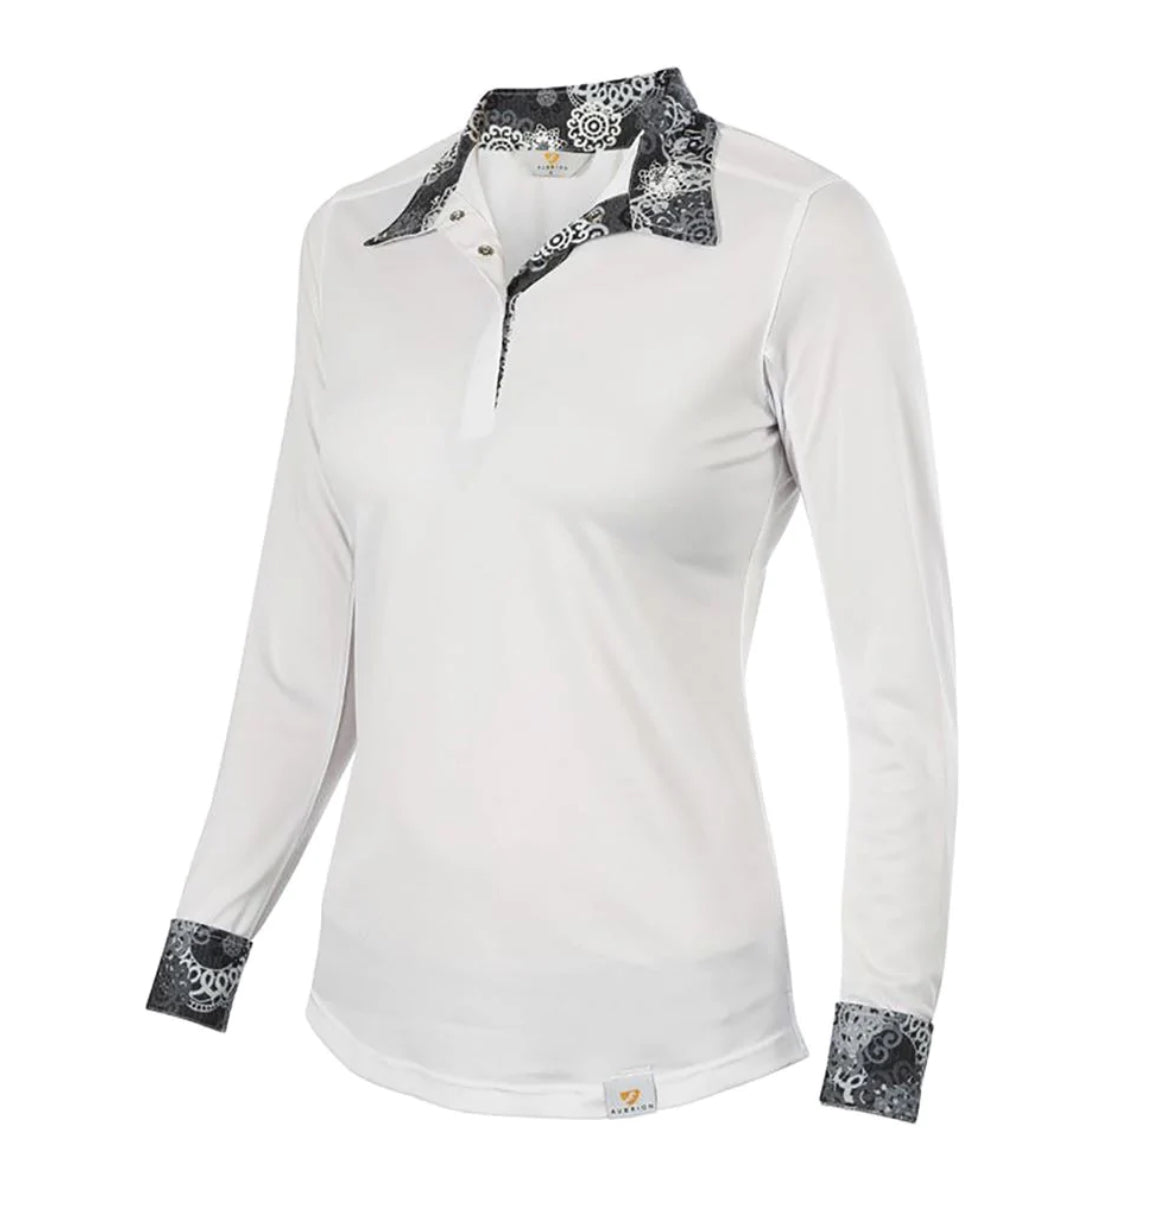 Aubrion Equestrian Ladies Breathable Show Shirt Long Sleeve